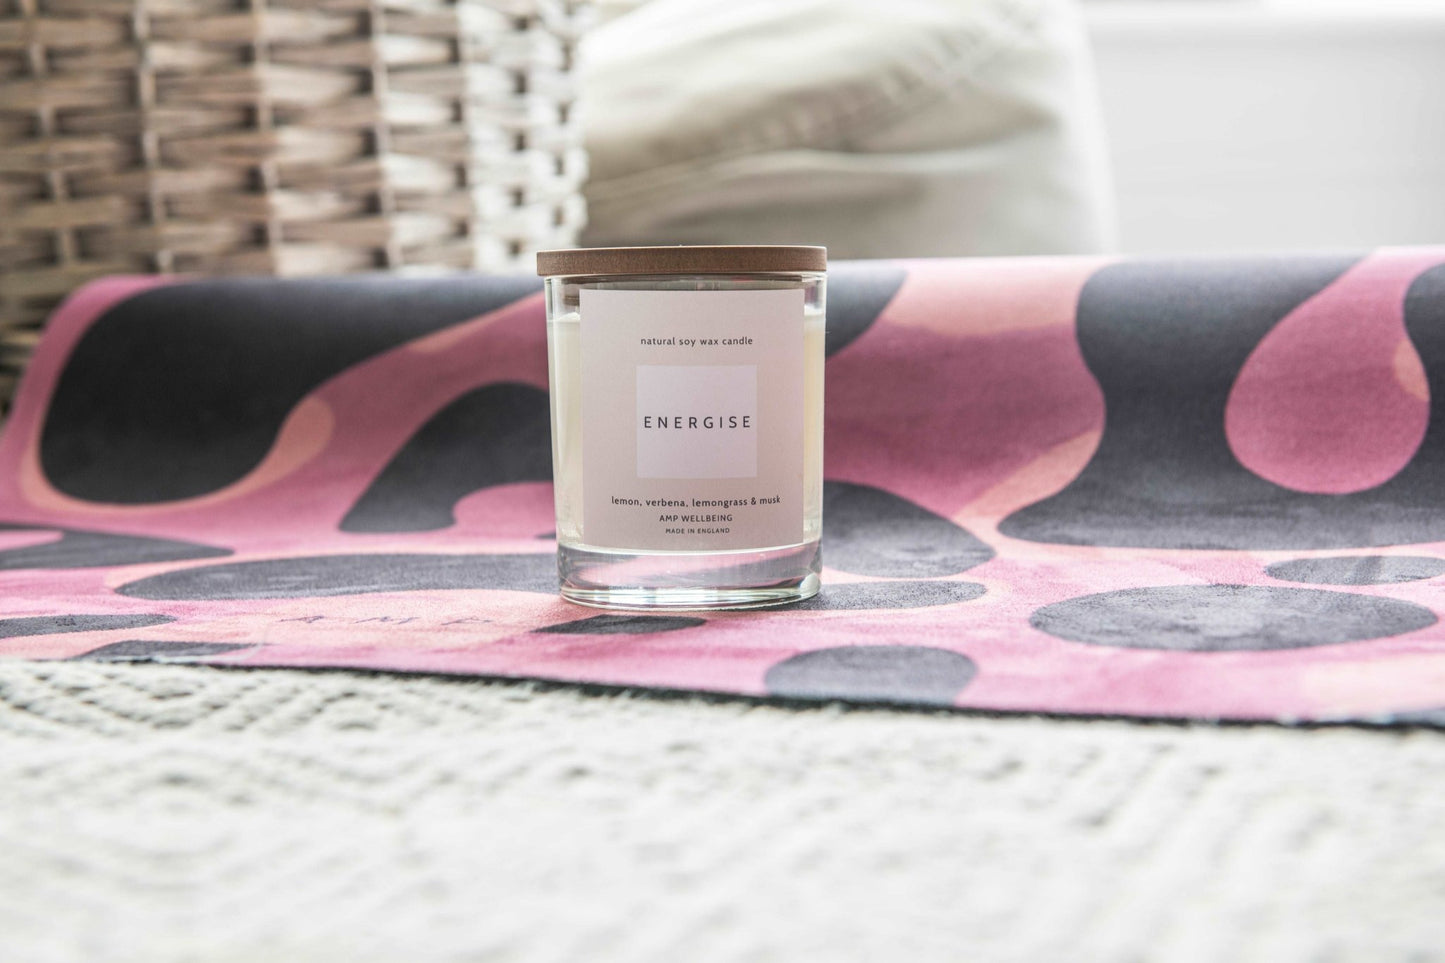 Energise Natural Soy Wax Candle - Ampwellbeing